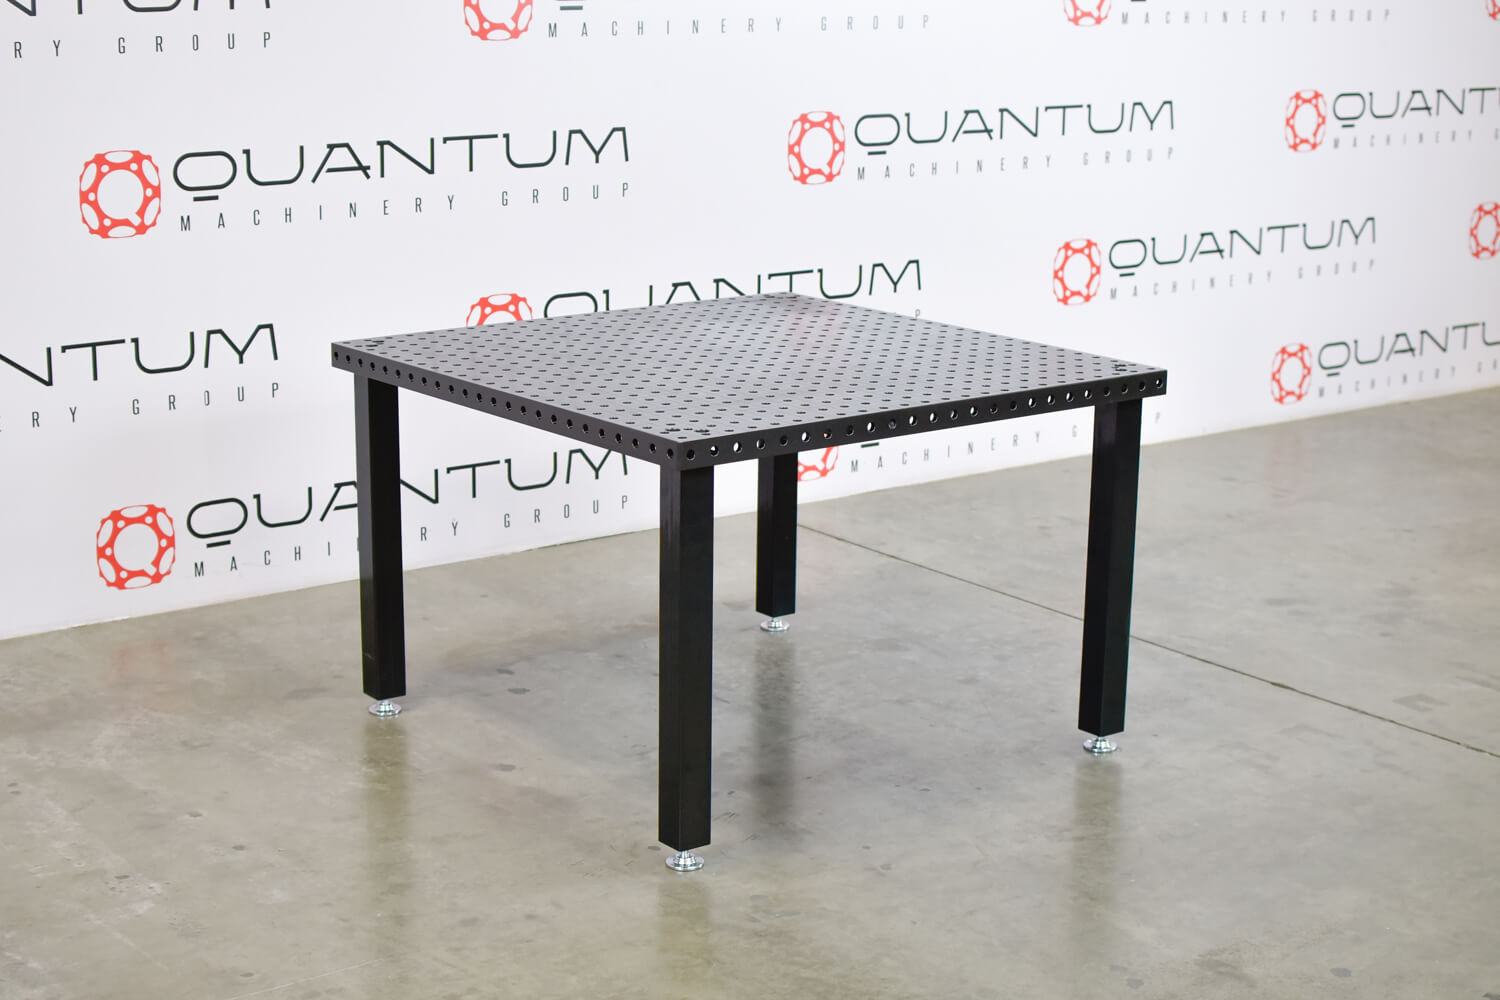 System 16 1000x1000mm (39"x39") Siegmund "BASIC" Welding Table (Item No. 4-161010.P) - Siegmund Welding Tables and Fixtures USA - A Division of Quantum Machinery Group